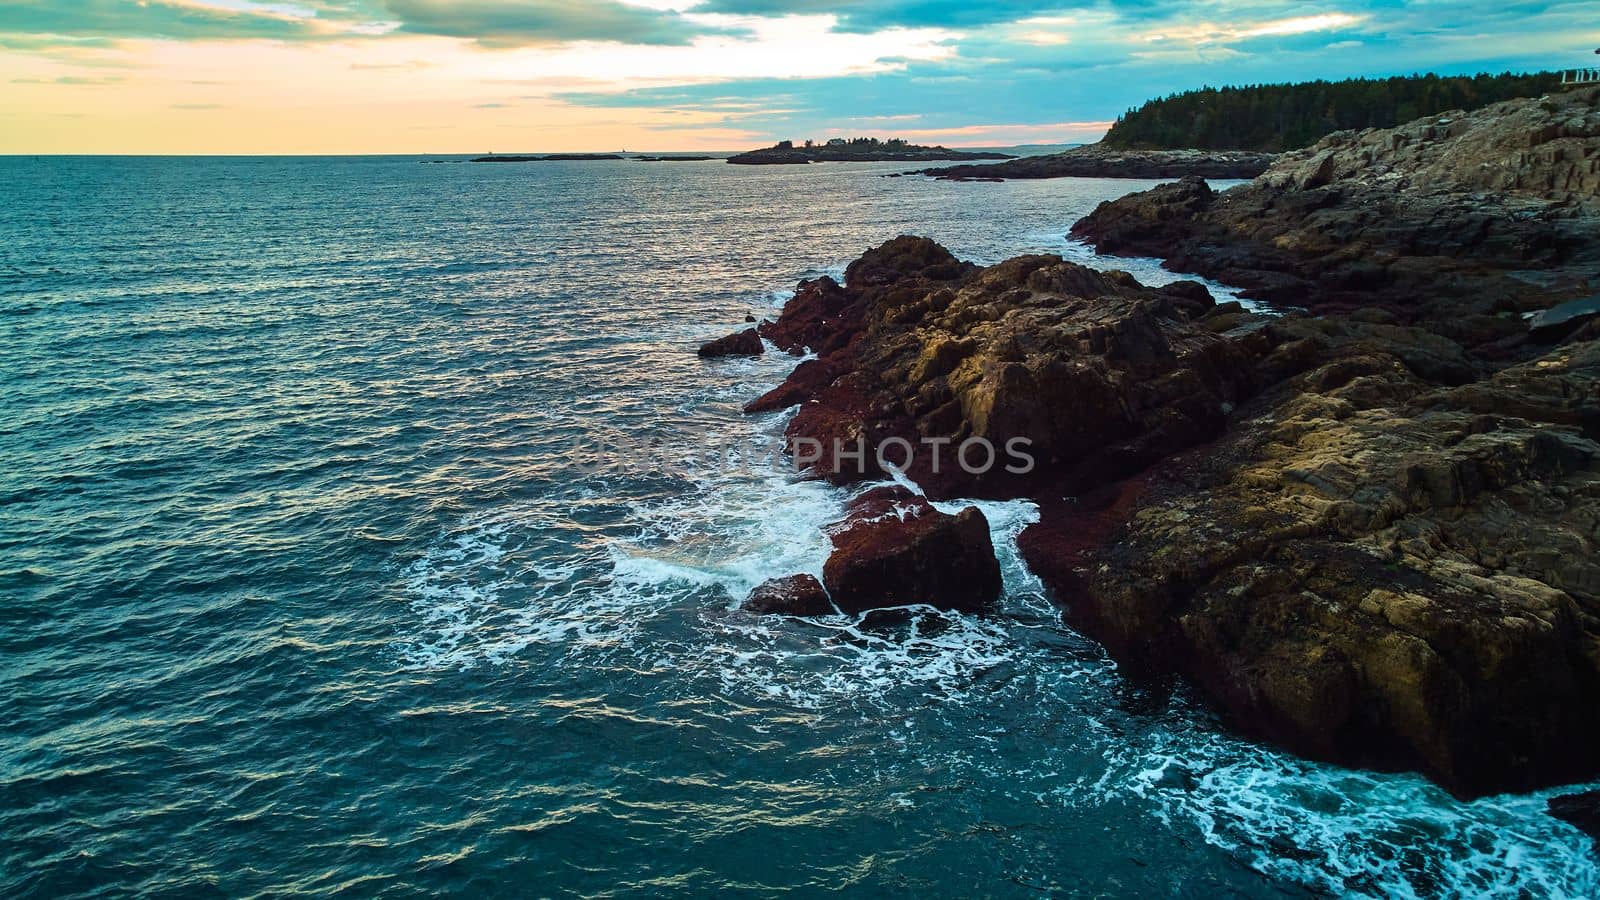 Image of Serene ocean view over coasts of Maine with rocky coasts, waves crashing, and sunset light